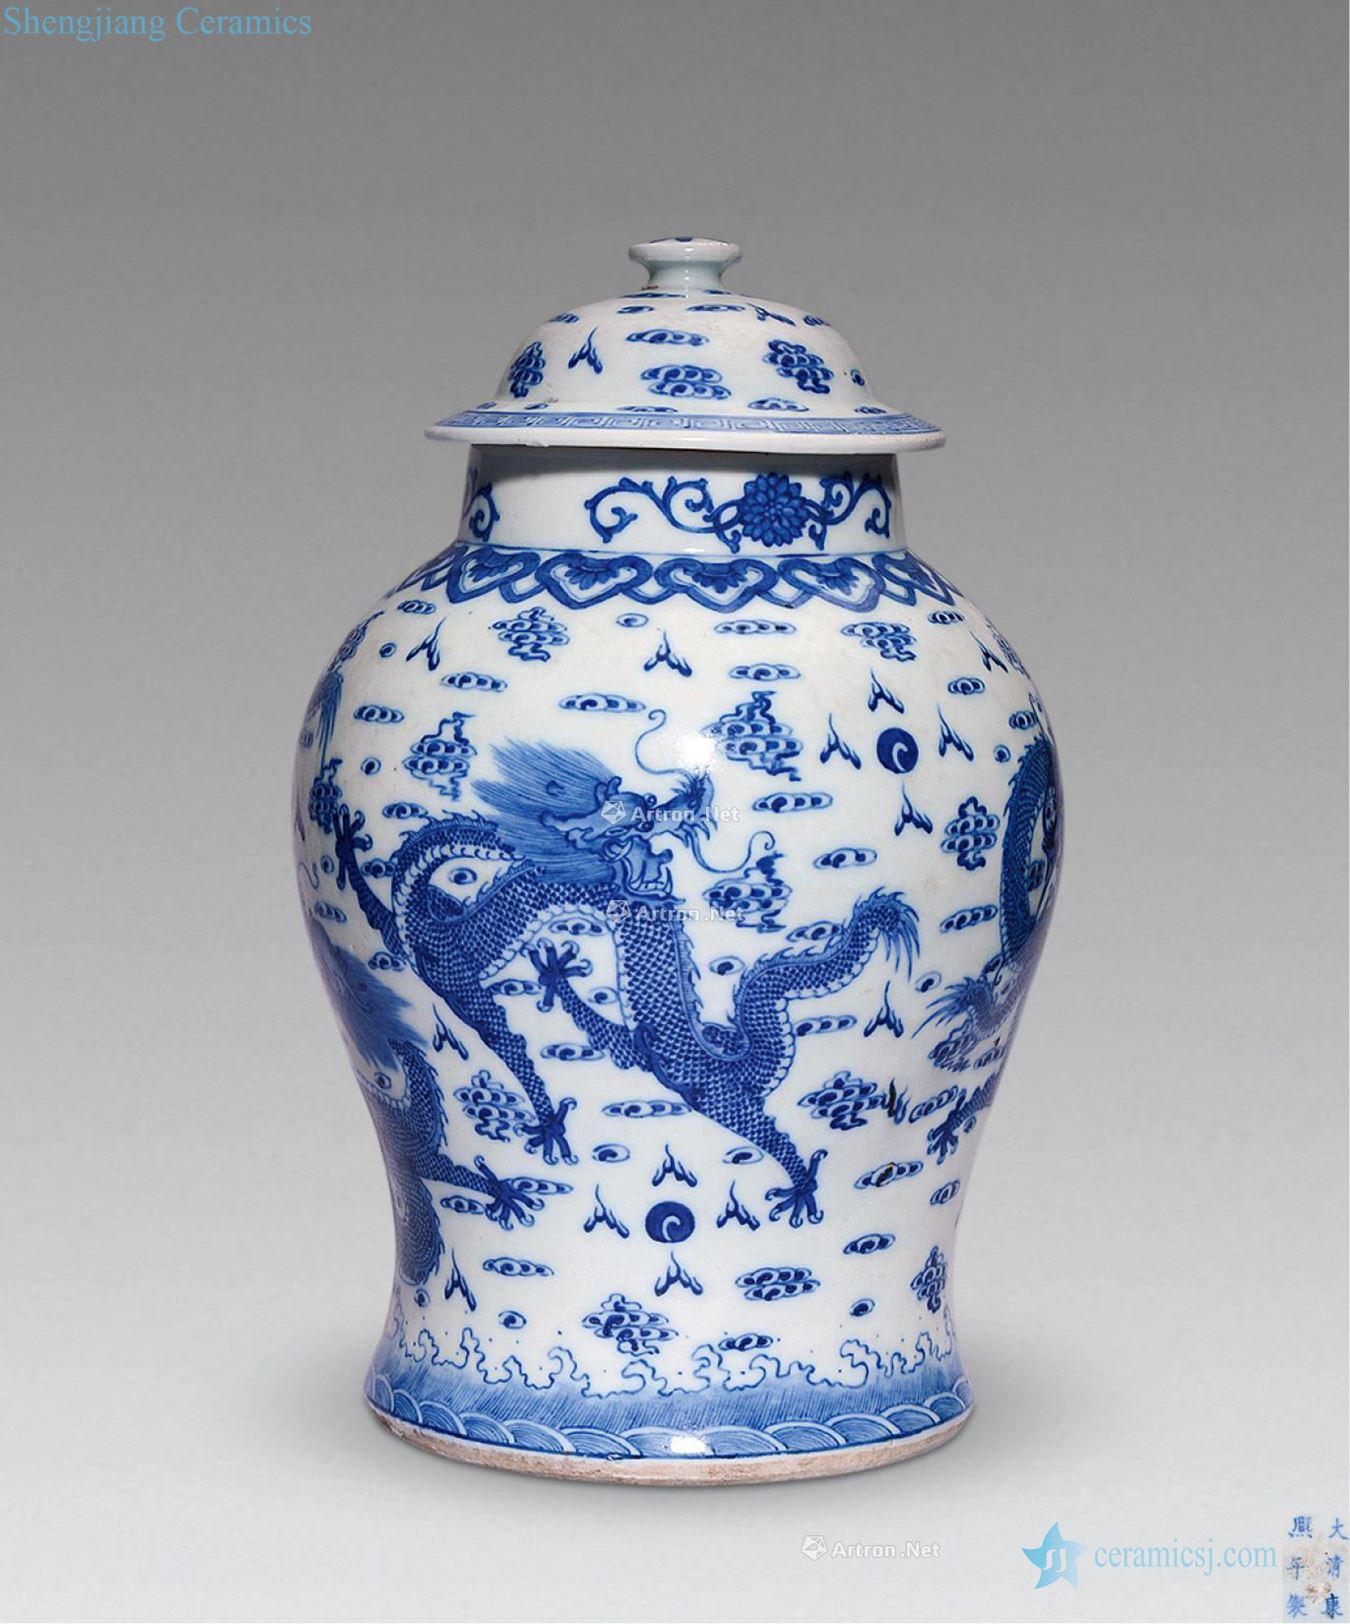 In the qing dynasty Blue and white dragon general tank